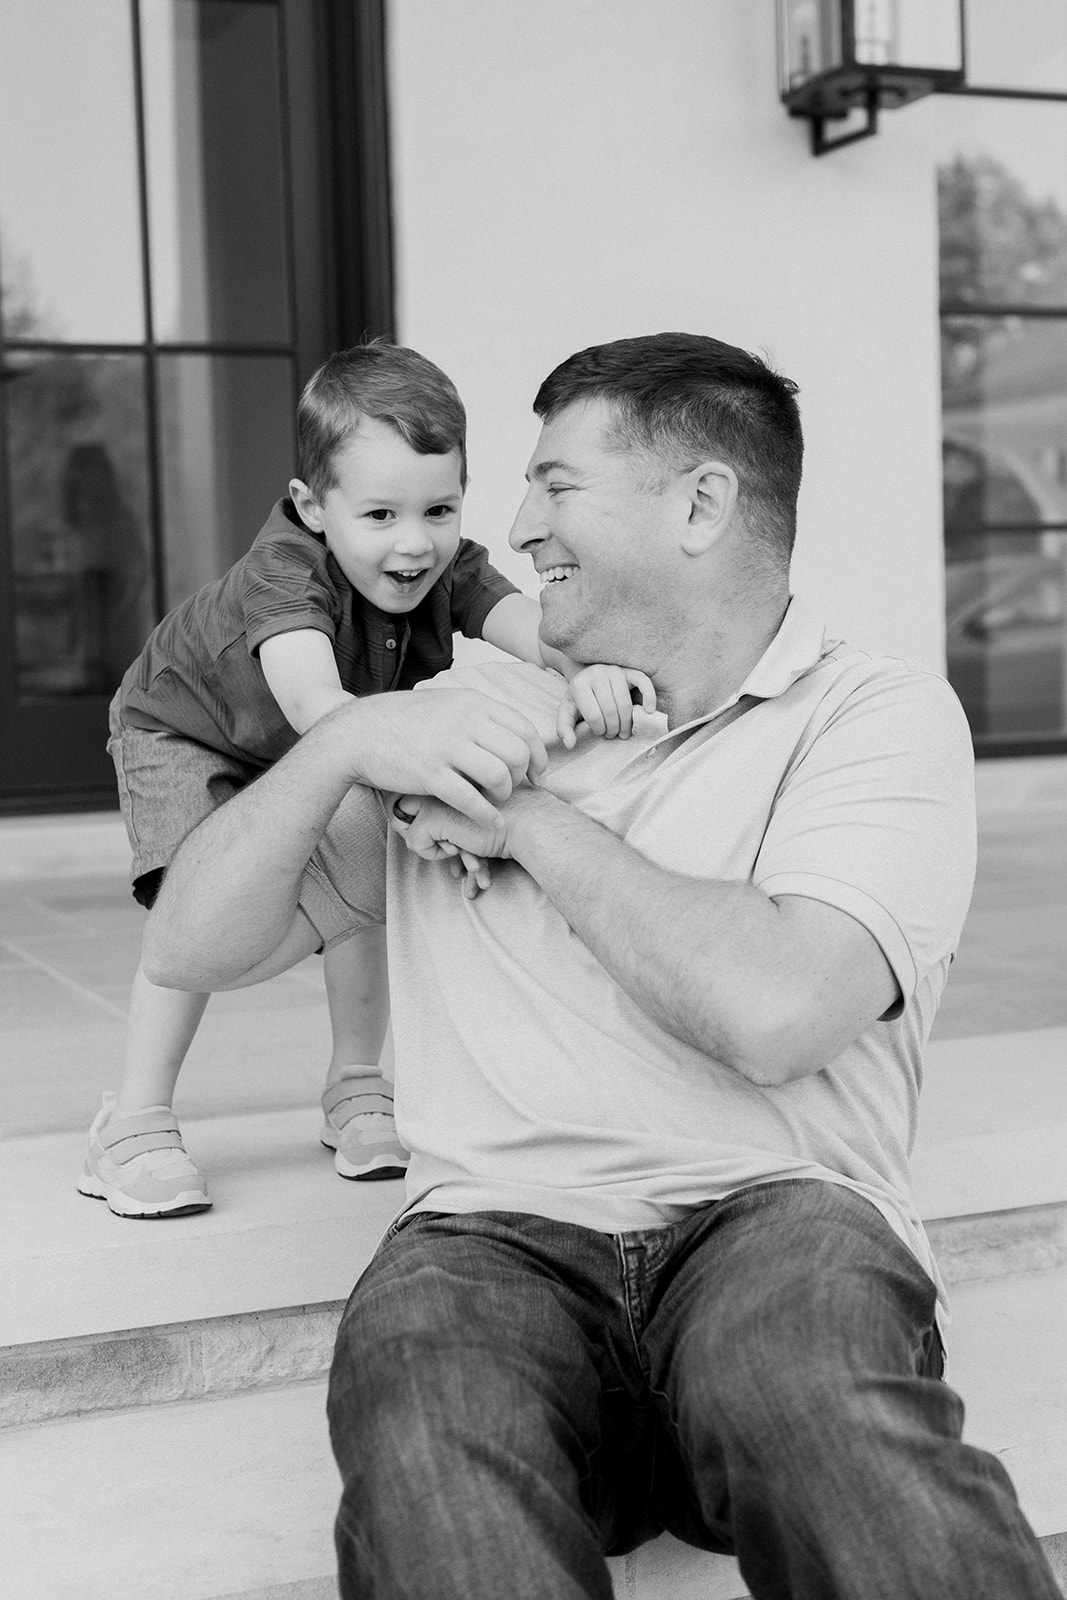 outdoor in-home family session in nashville tennessee. dad and son photo